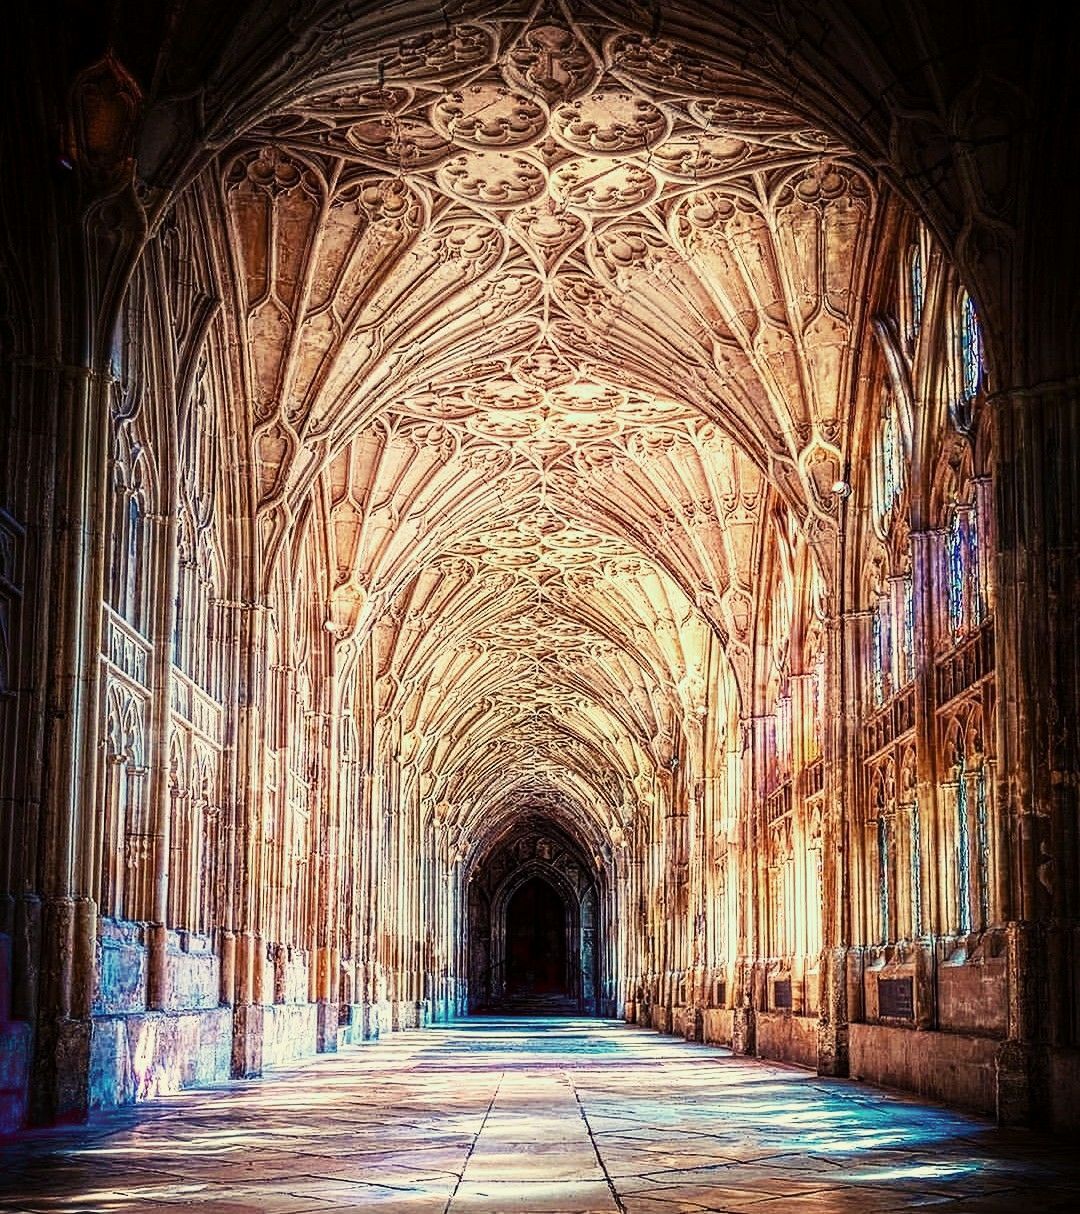 Gloucester Cathedral - An English Cathedral Of The 11th Century, It Is One Of The Masterpieces Of Gothic Architecture Around The World.